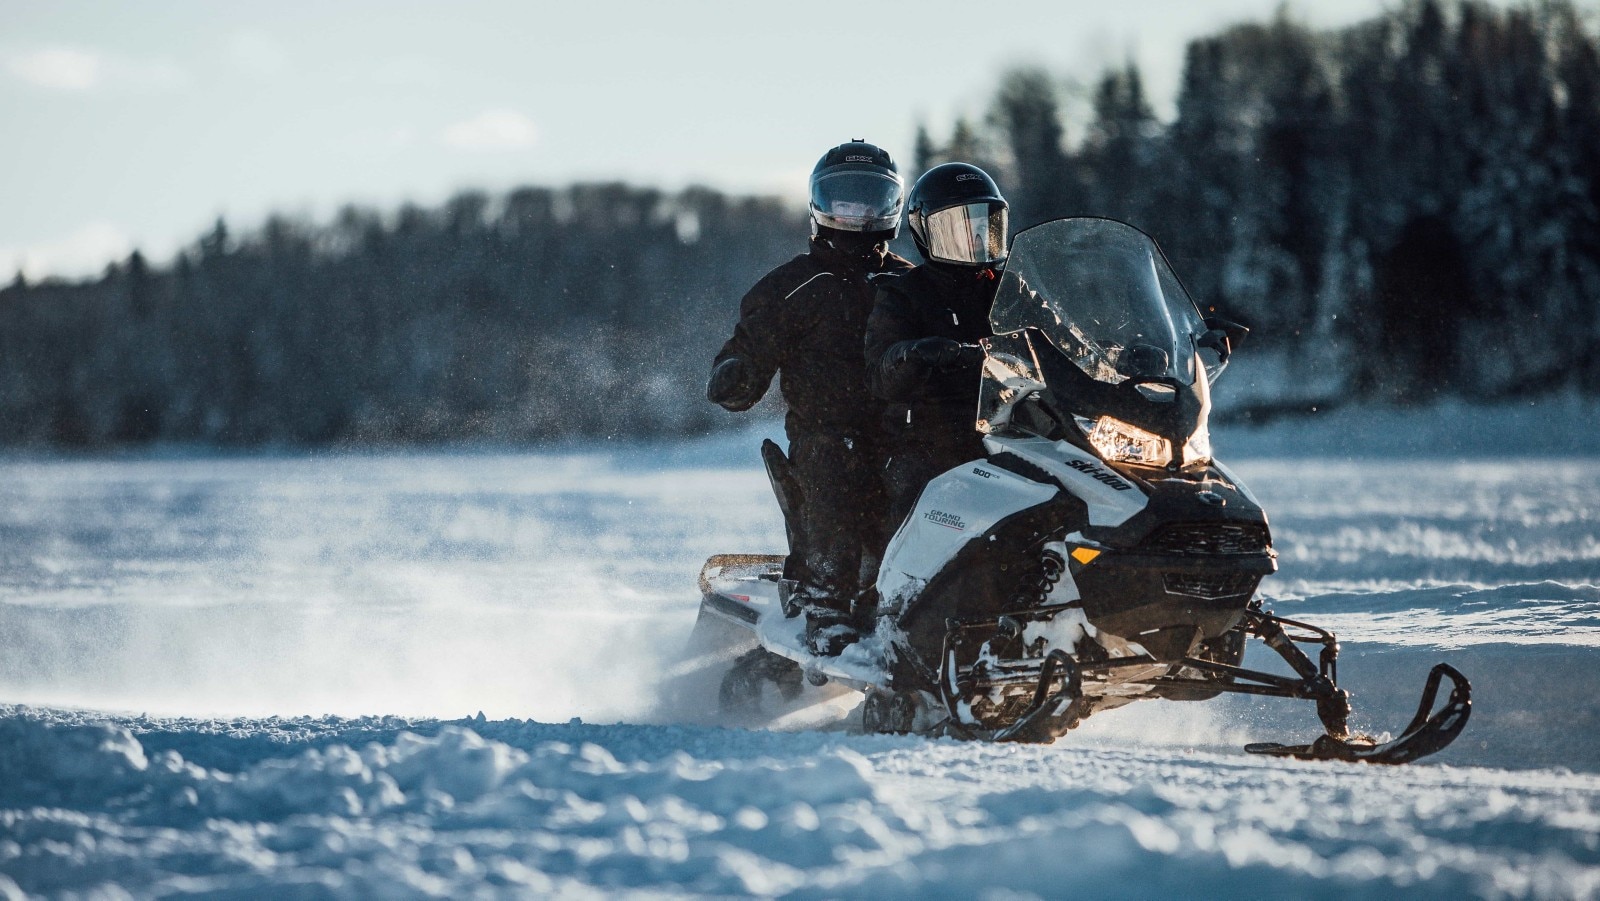 Two person riding on a Ski-Doo